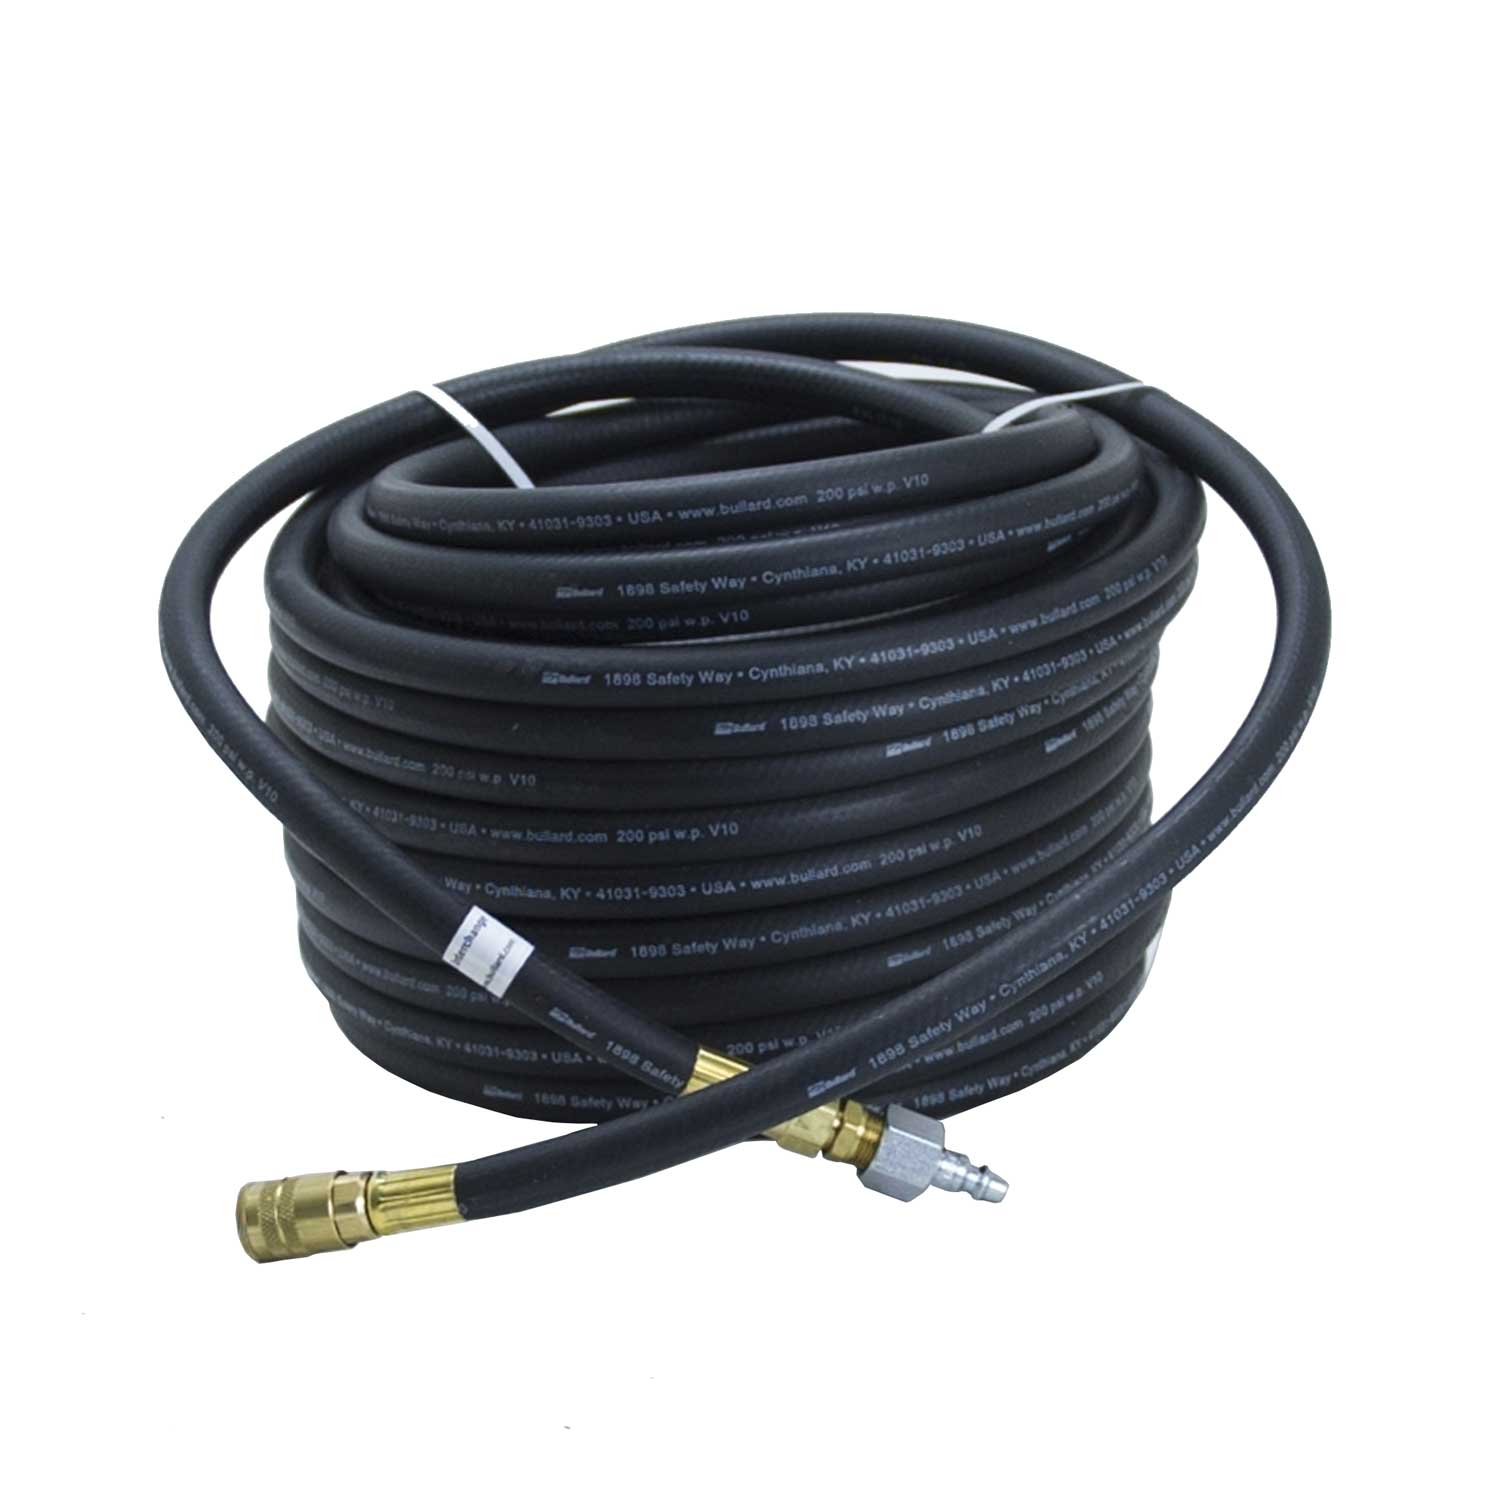 469650 - Air Supply Hose V10 3/8"ID 50 ft. (use for compressed air) - PURspray